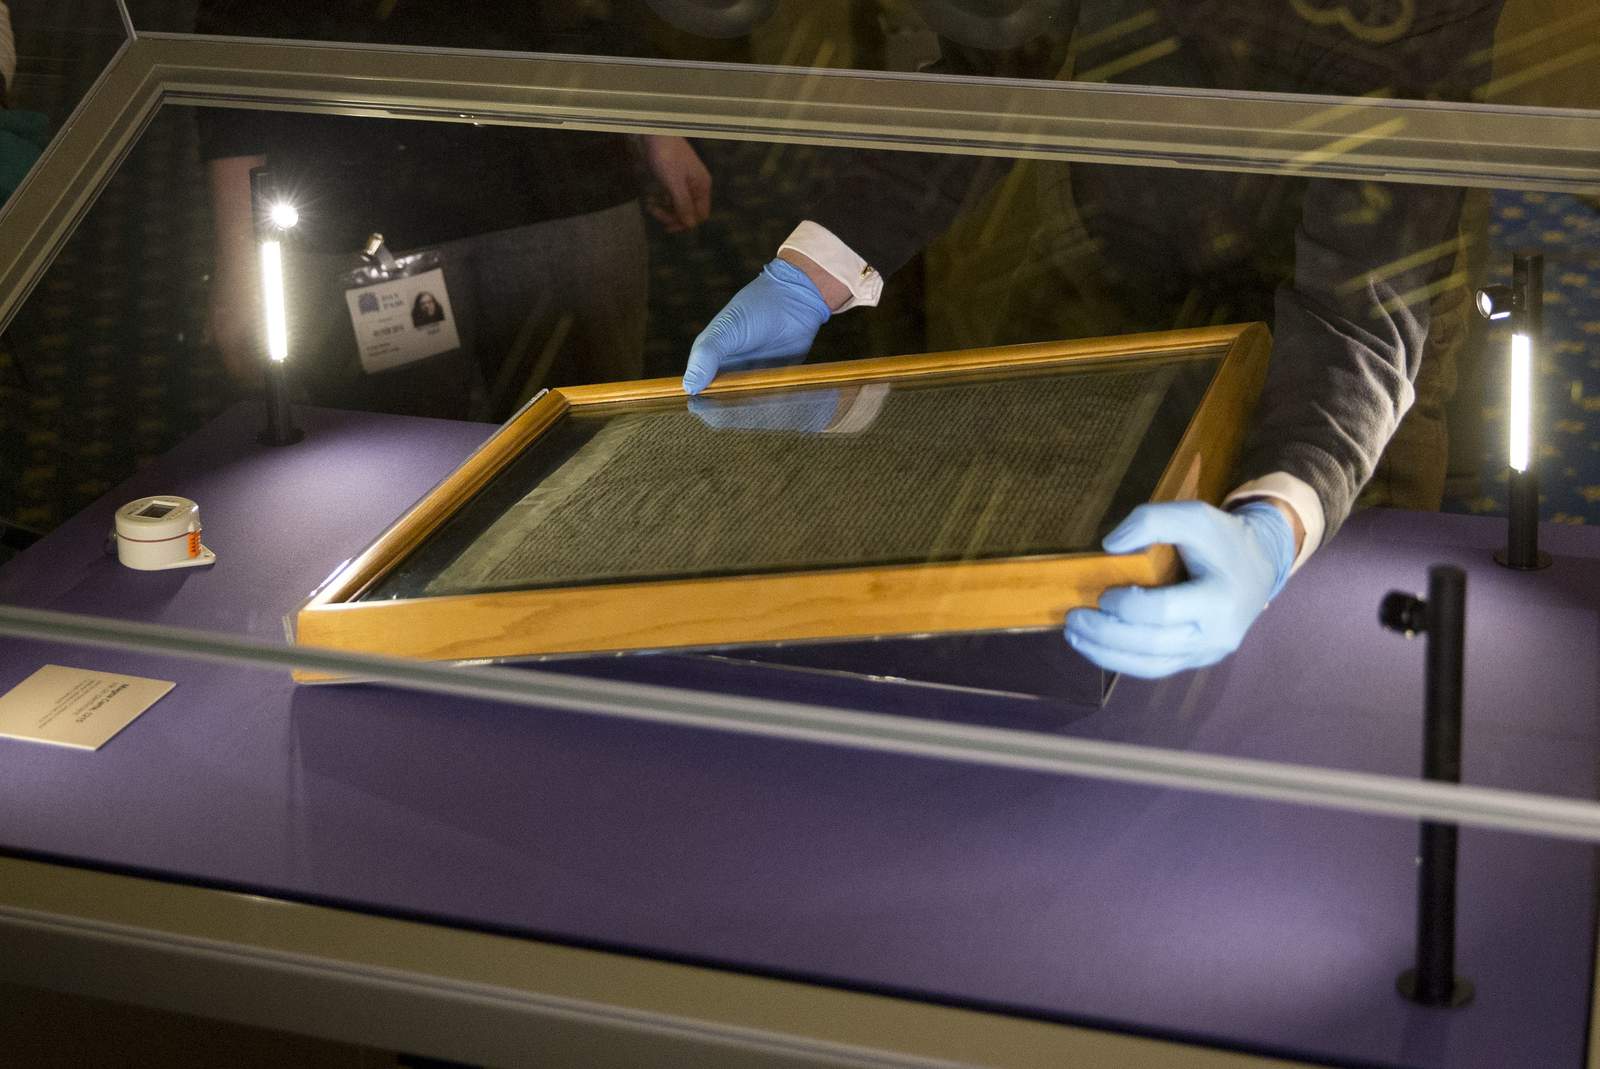 Man gets prison for failed theft of Magna Carta in England